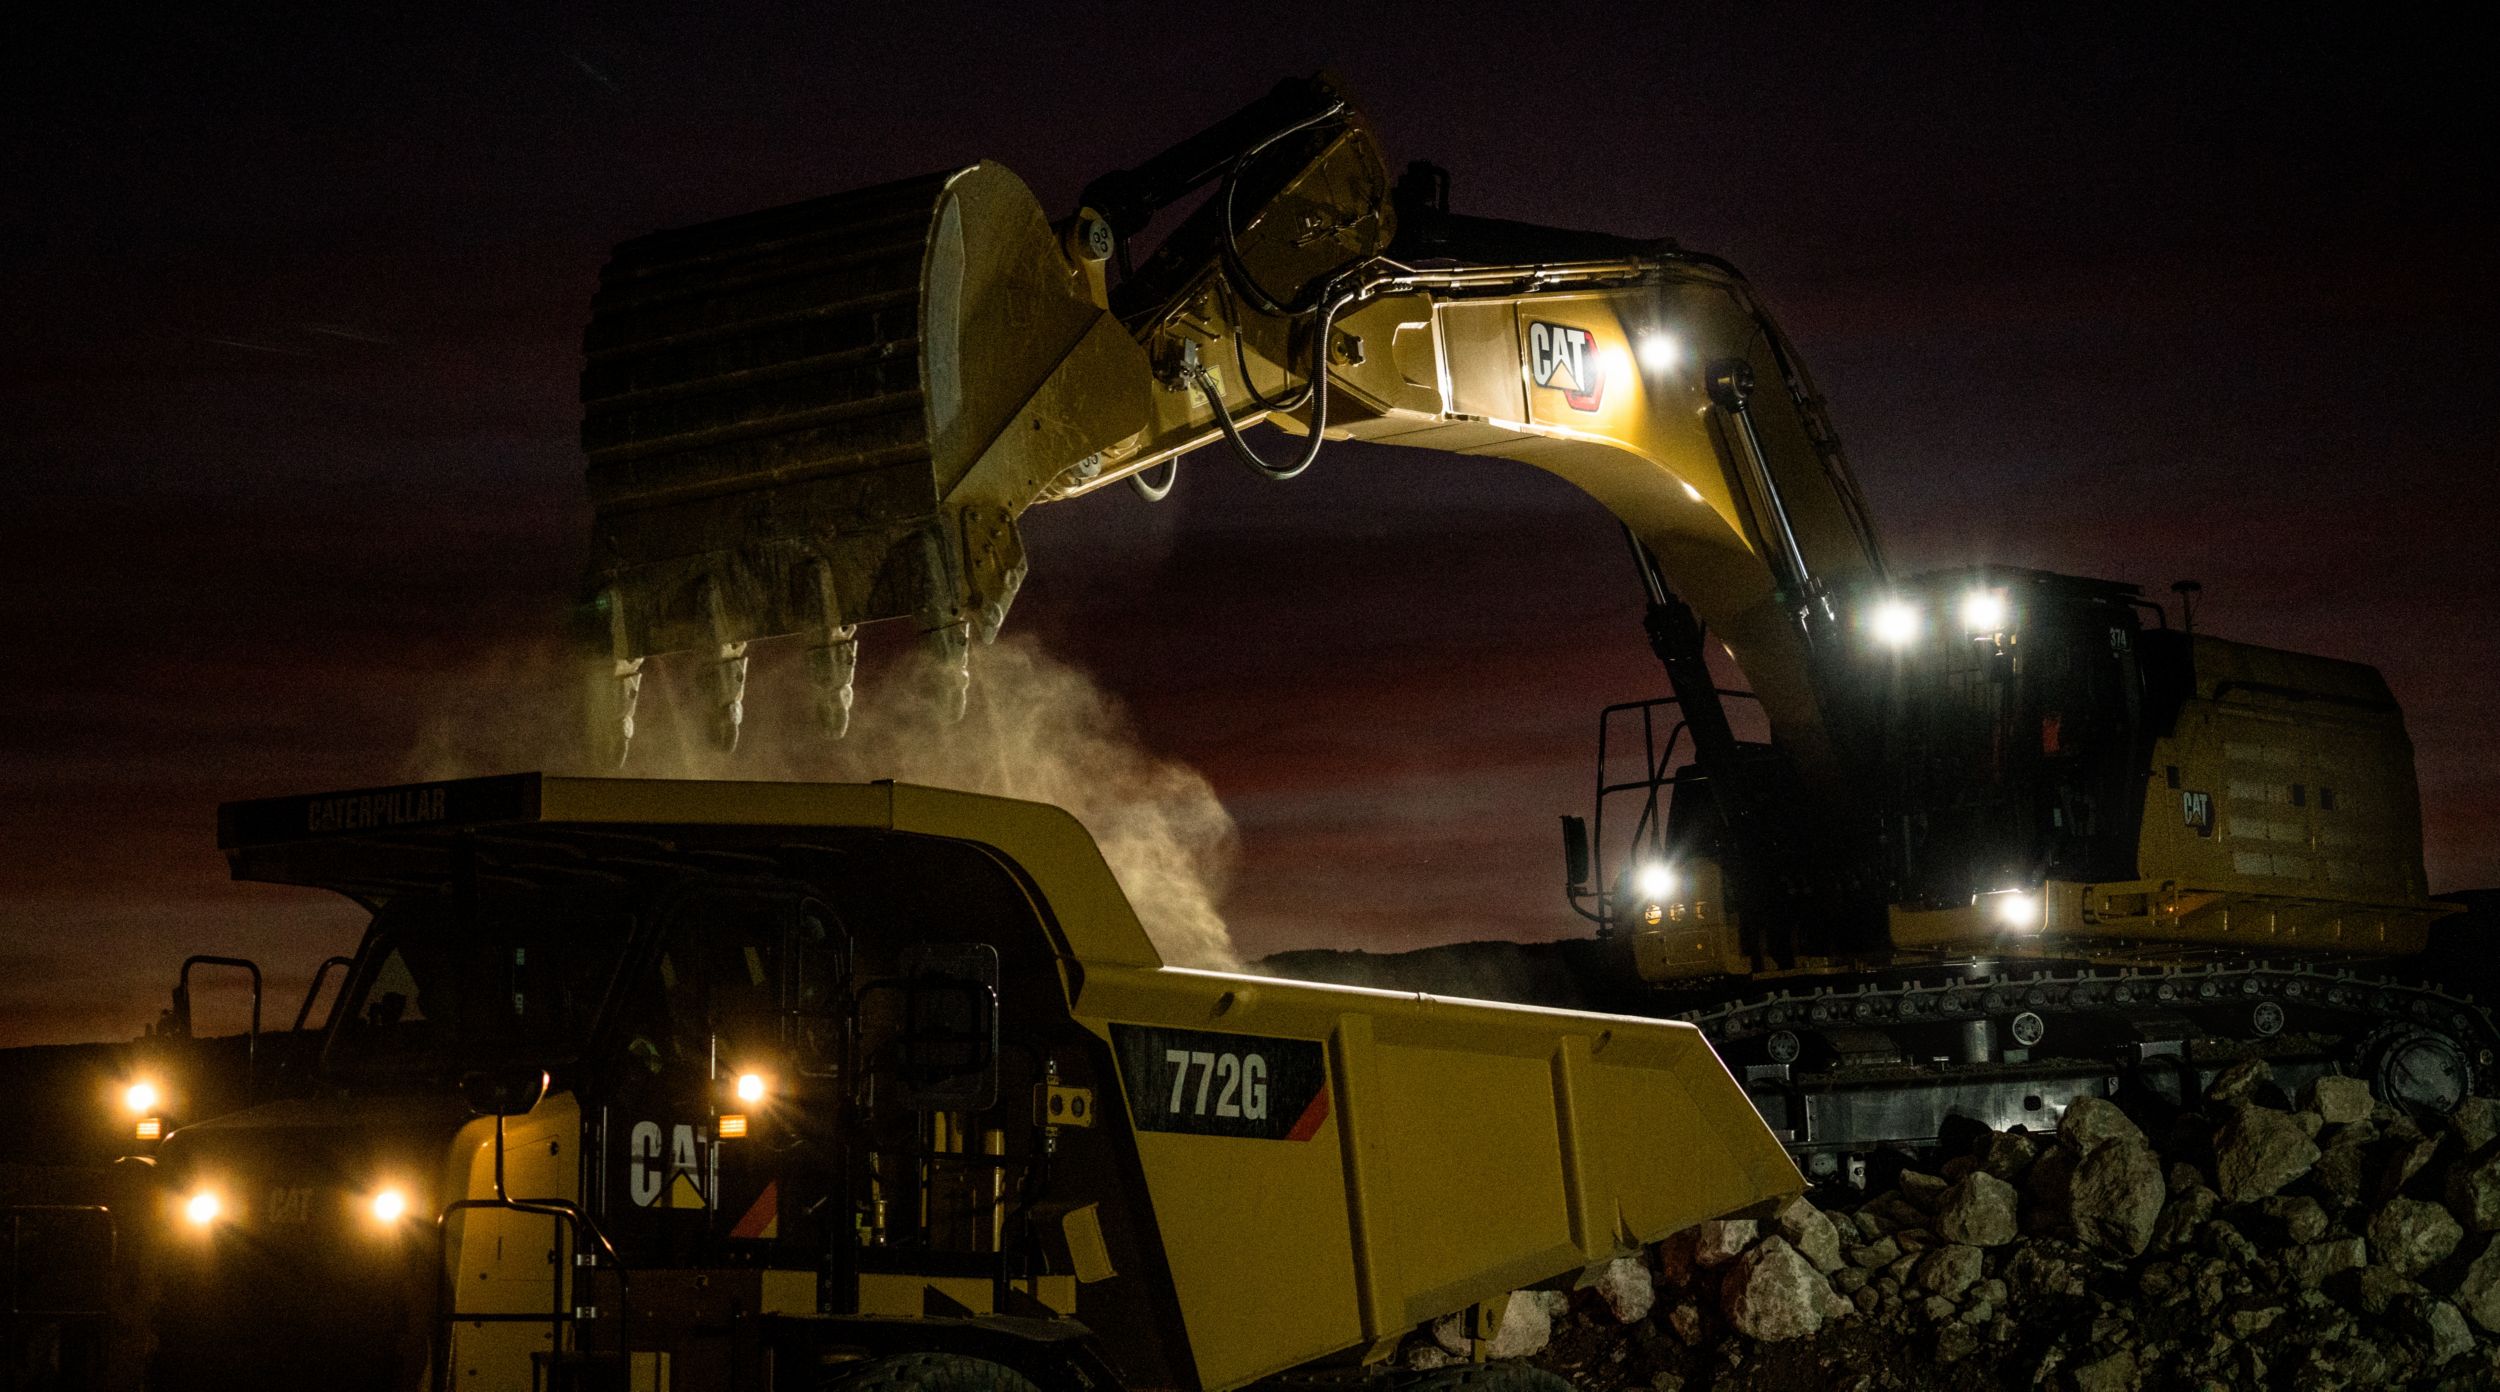 The Cat 374 hydraulic excavator and 772 truck are the perfect pair for high production.